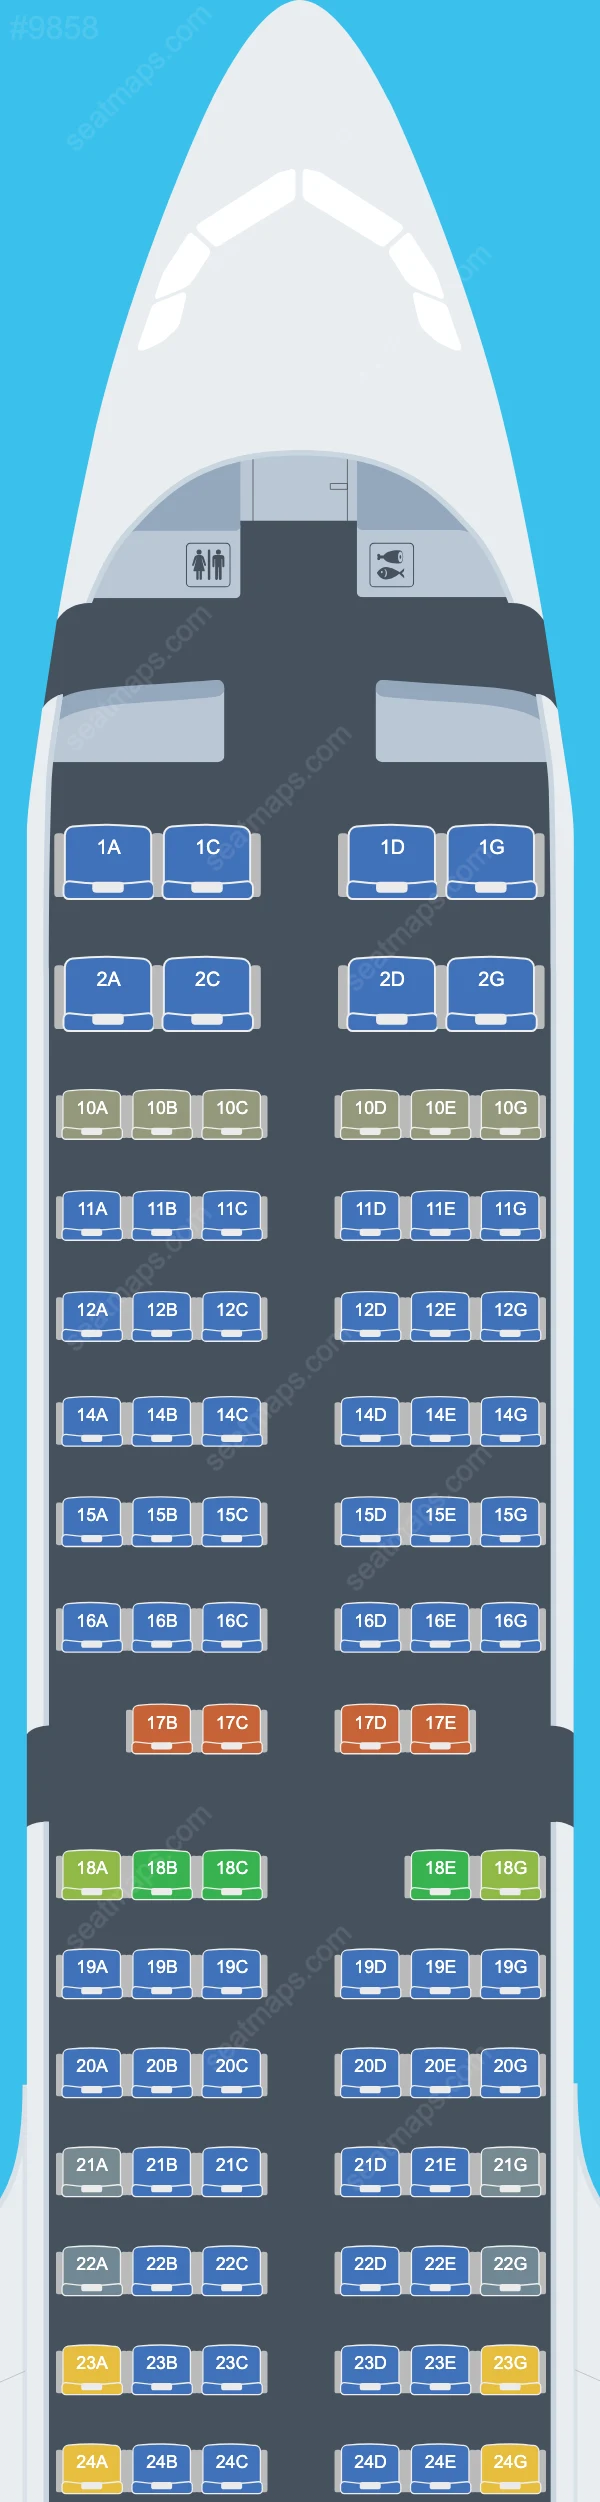 Vietnam Airlines Airbus A321 Seat Maps A321-200neo